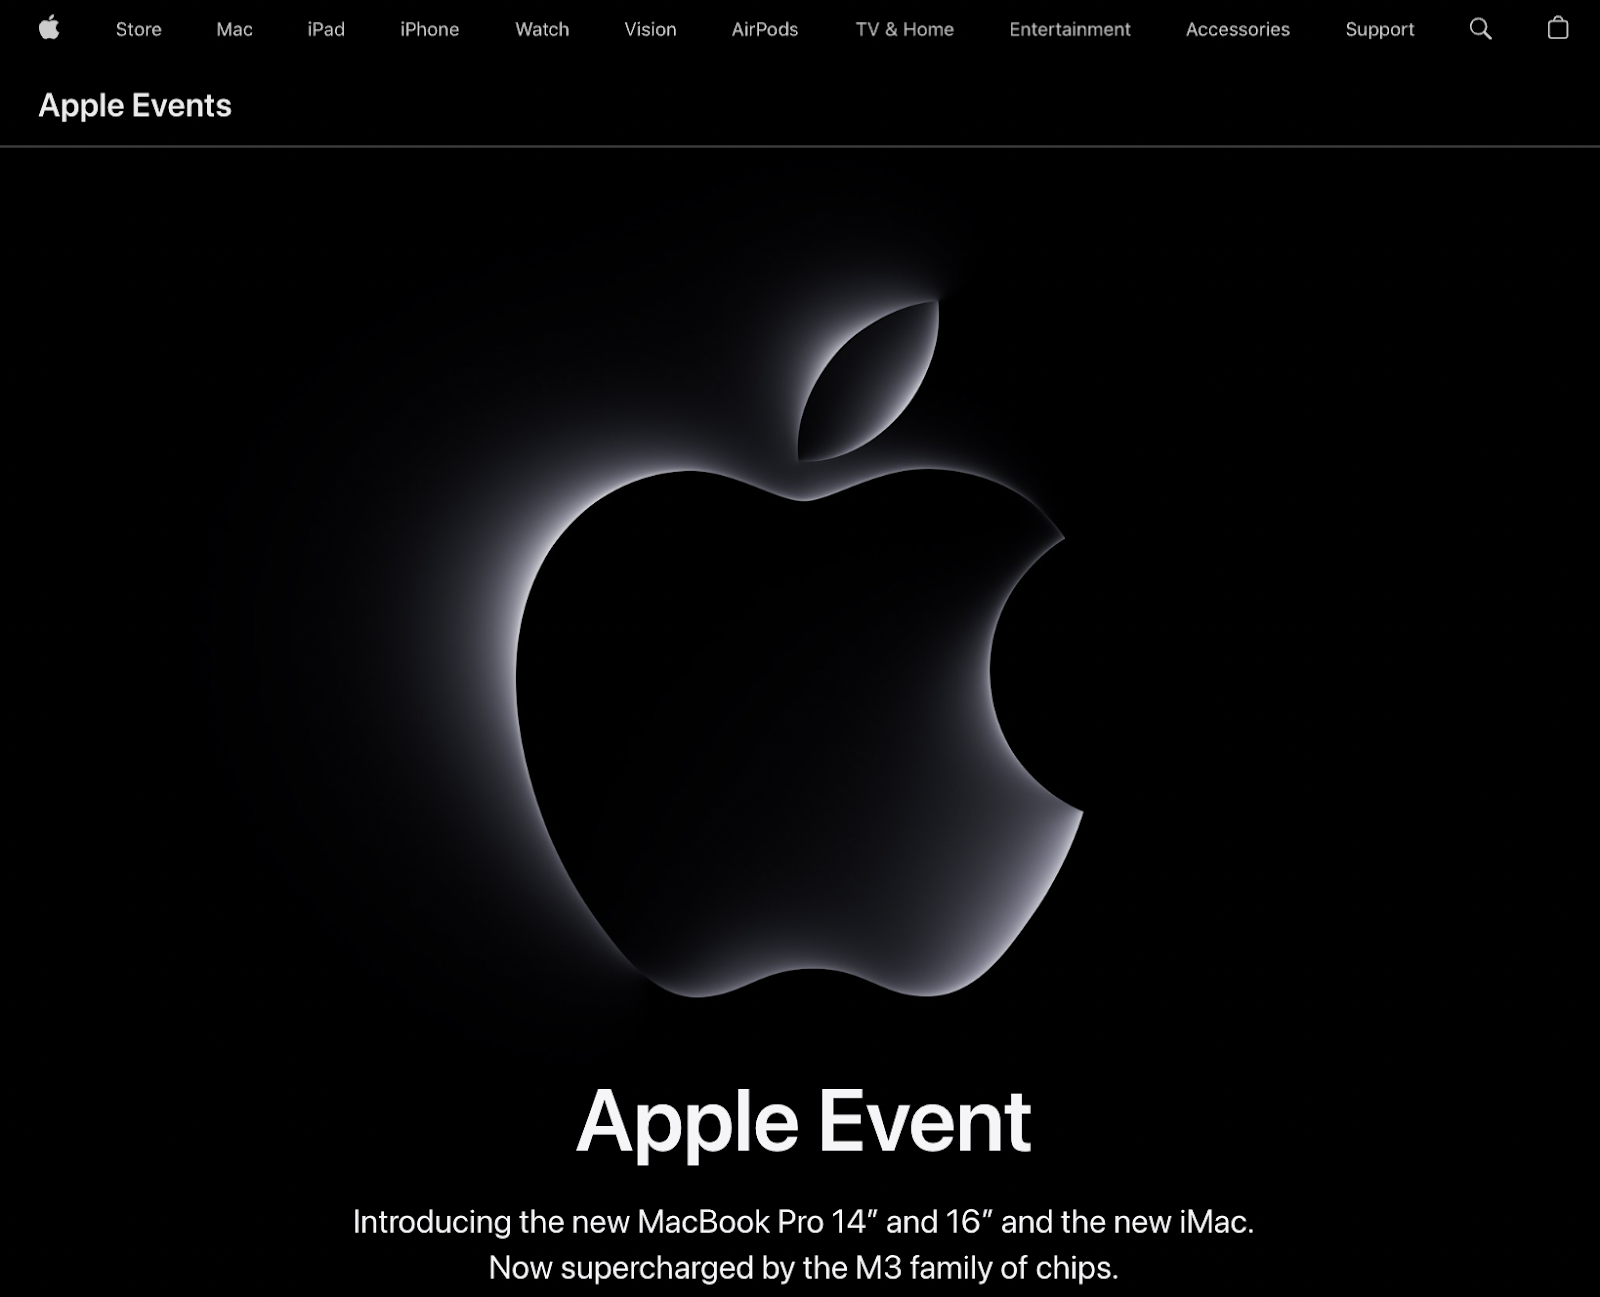 Apple’s product launch announcement under "Apple Events" page